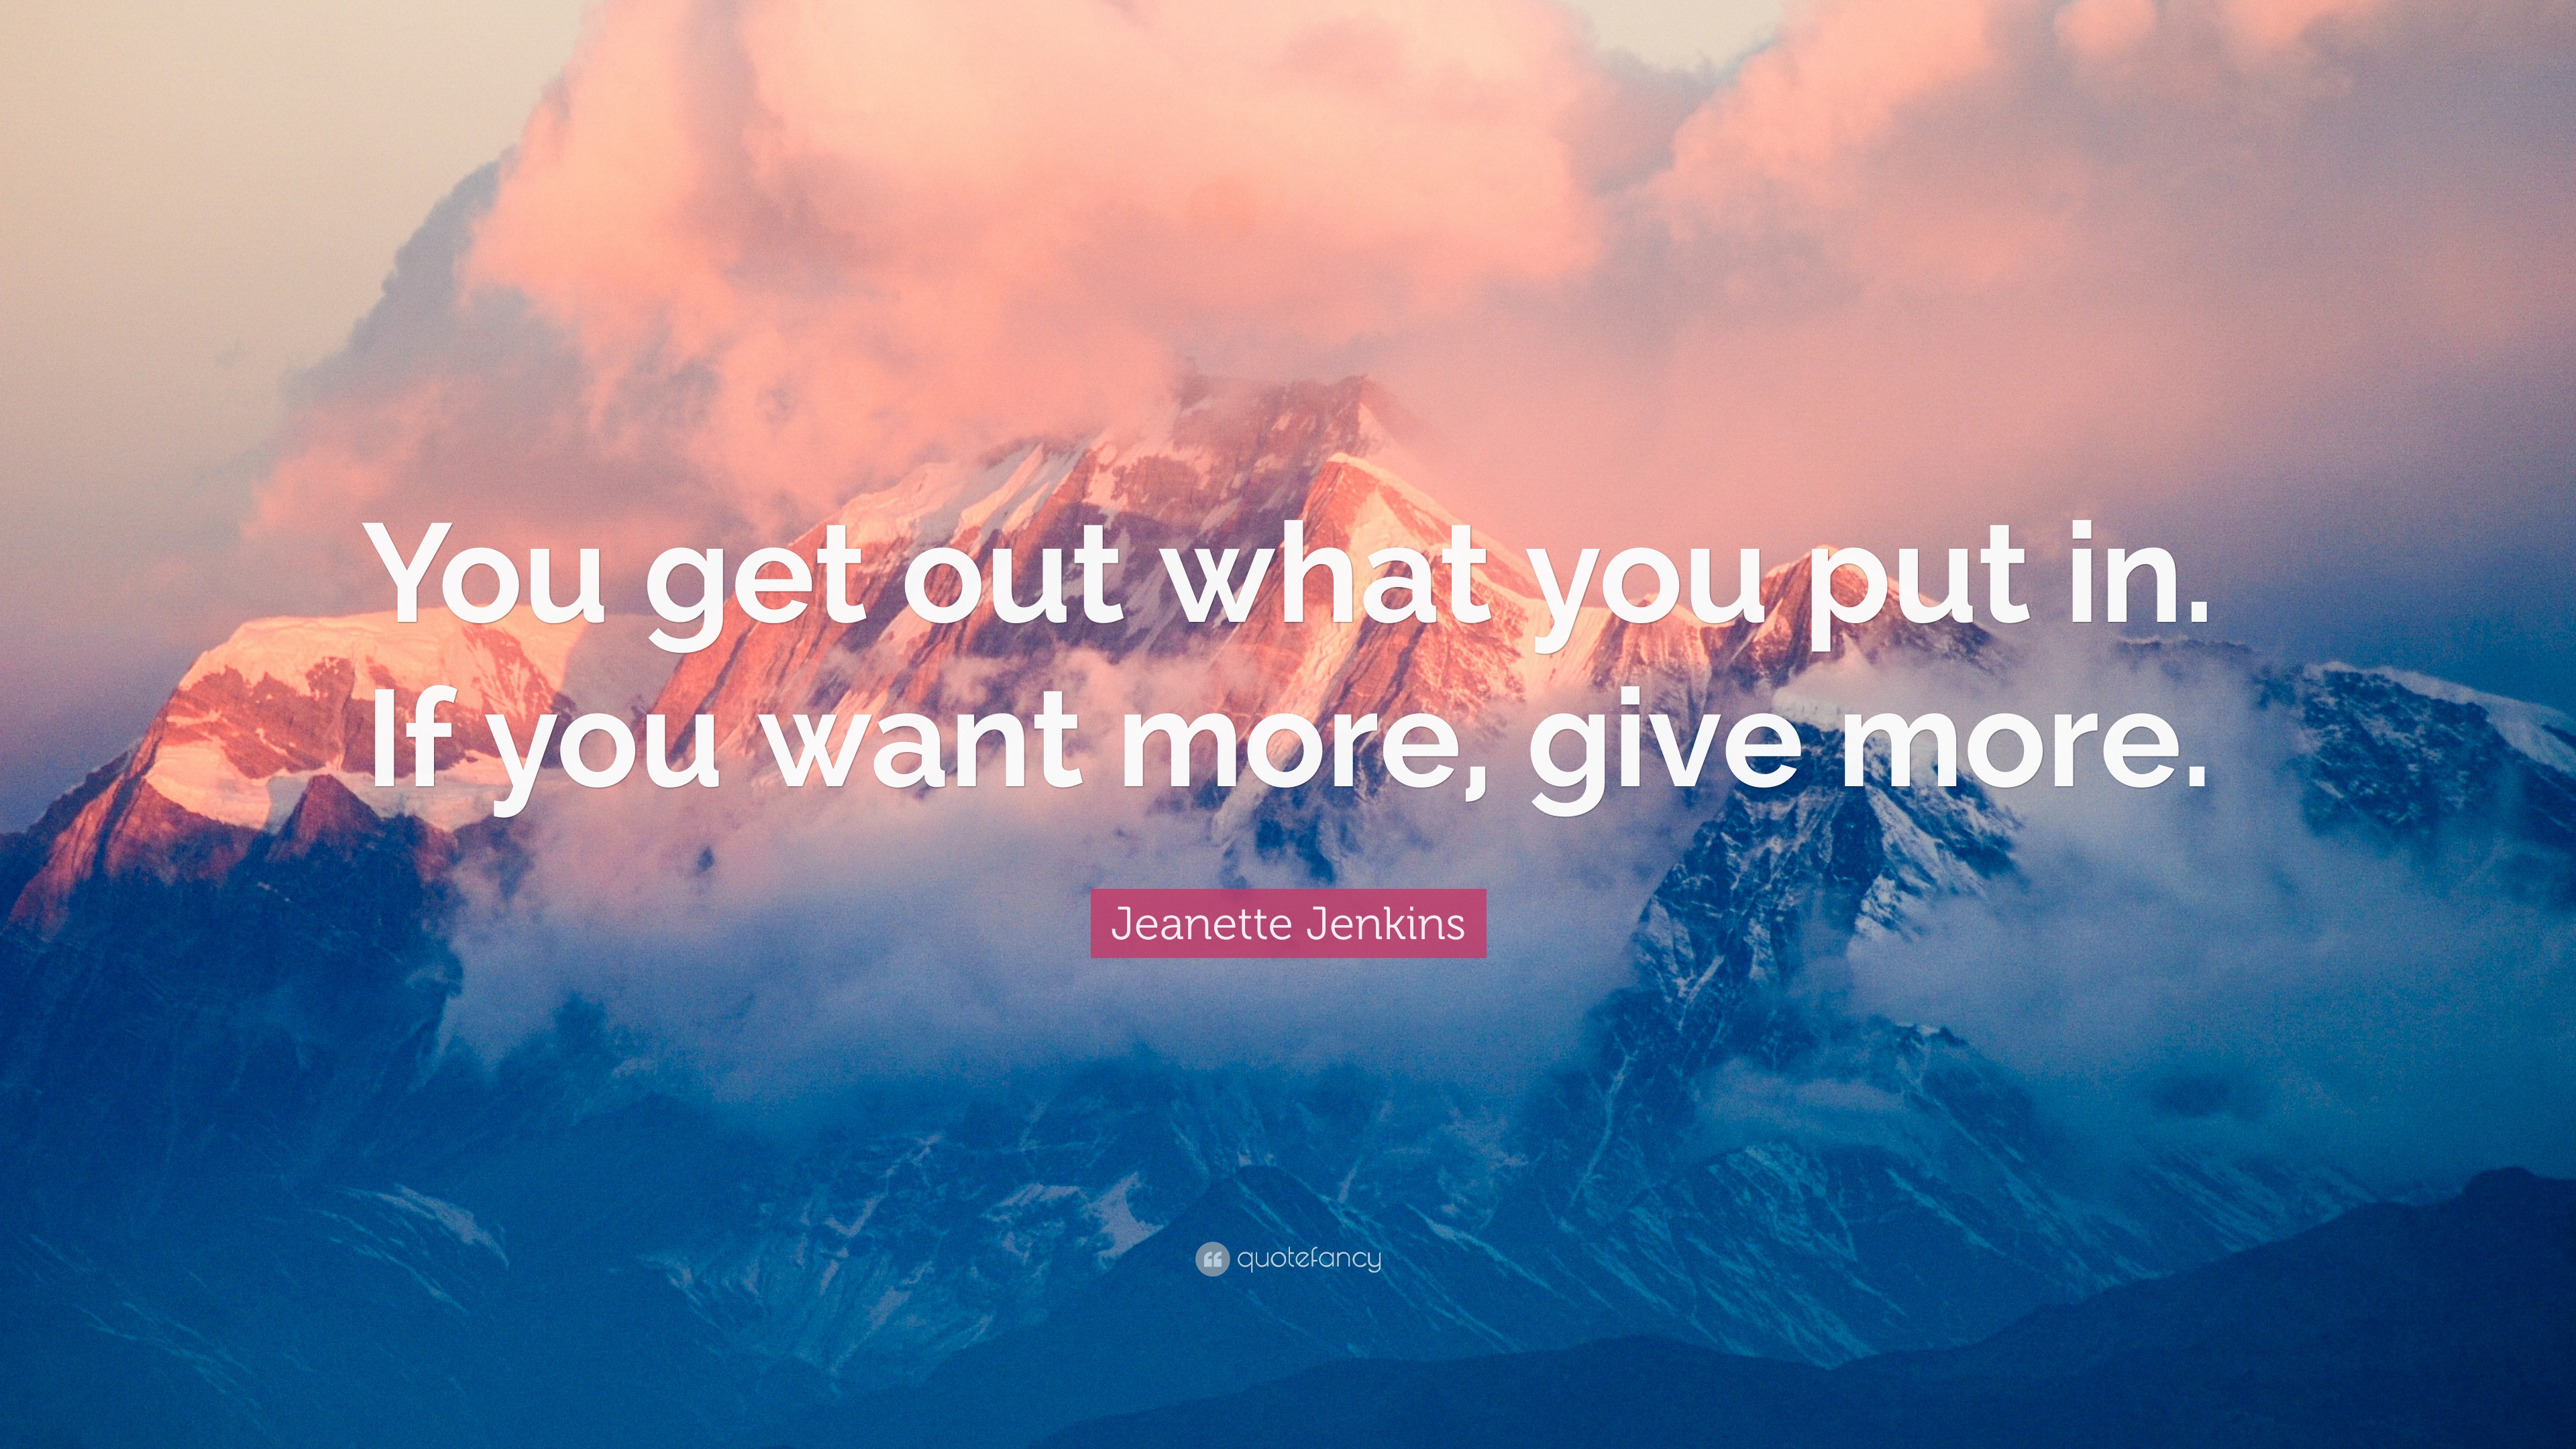 Jeanette Jenkins Quote You Get Out What You Put In If You Want More Give More 10 Wallpapers Quotefancy